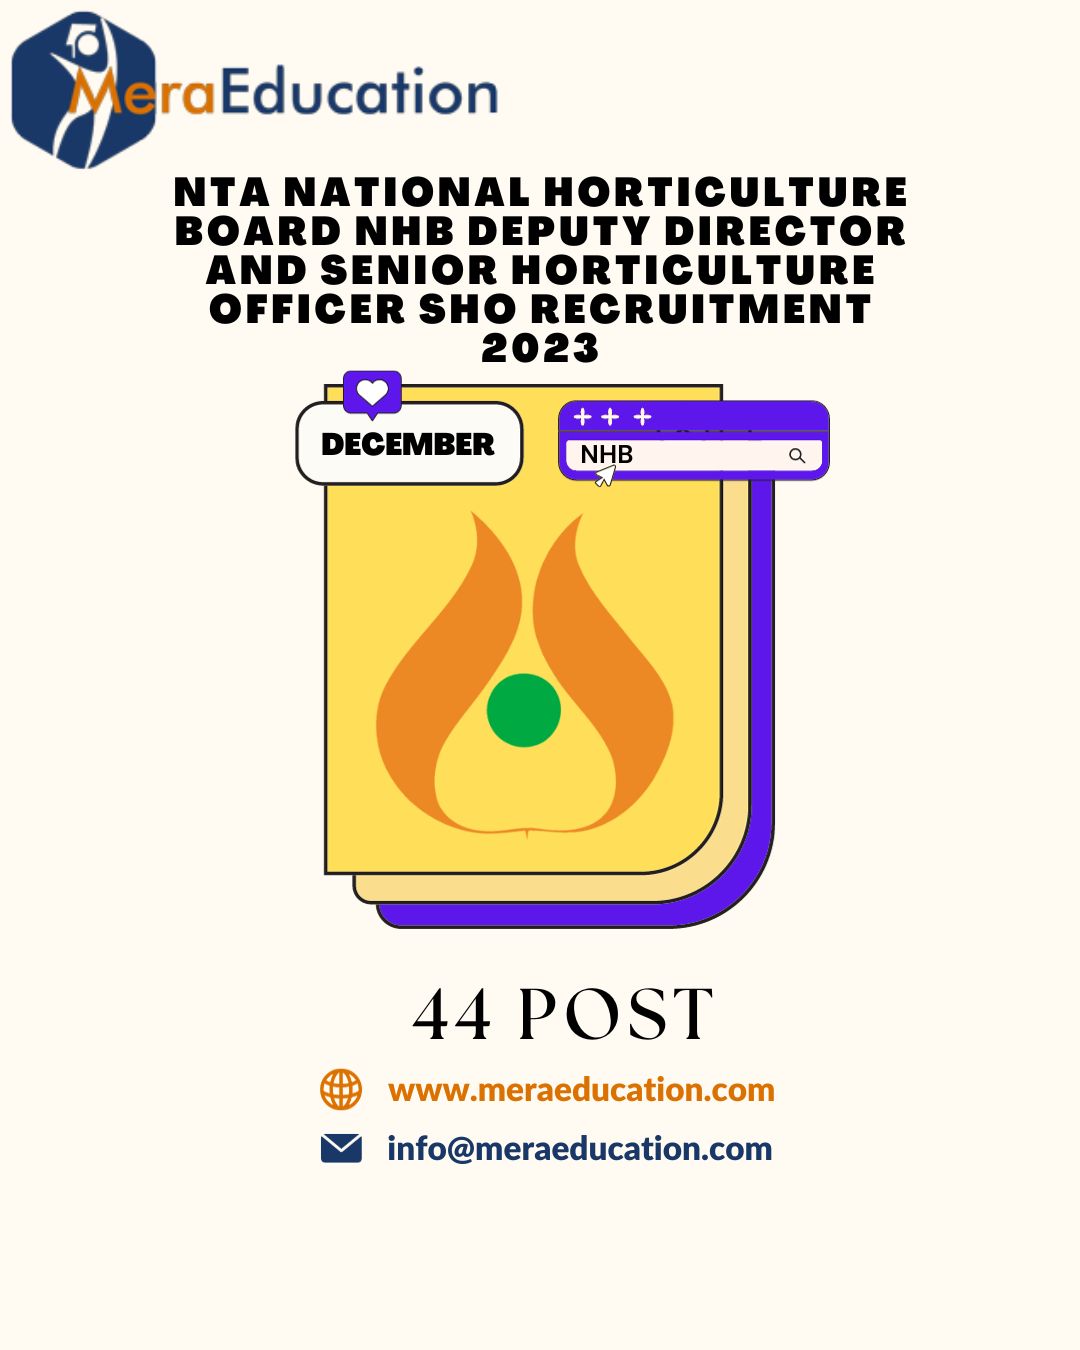 NTA National Horticulture Board NHB Deputy Director and Senior Horticulture Officer SHO Recruitment 2023